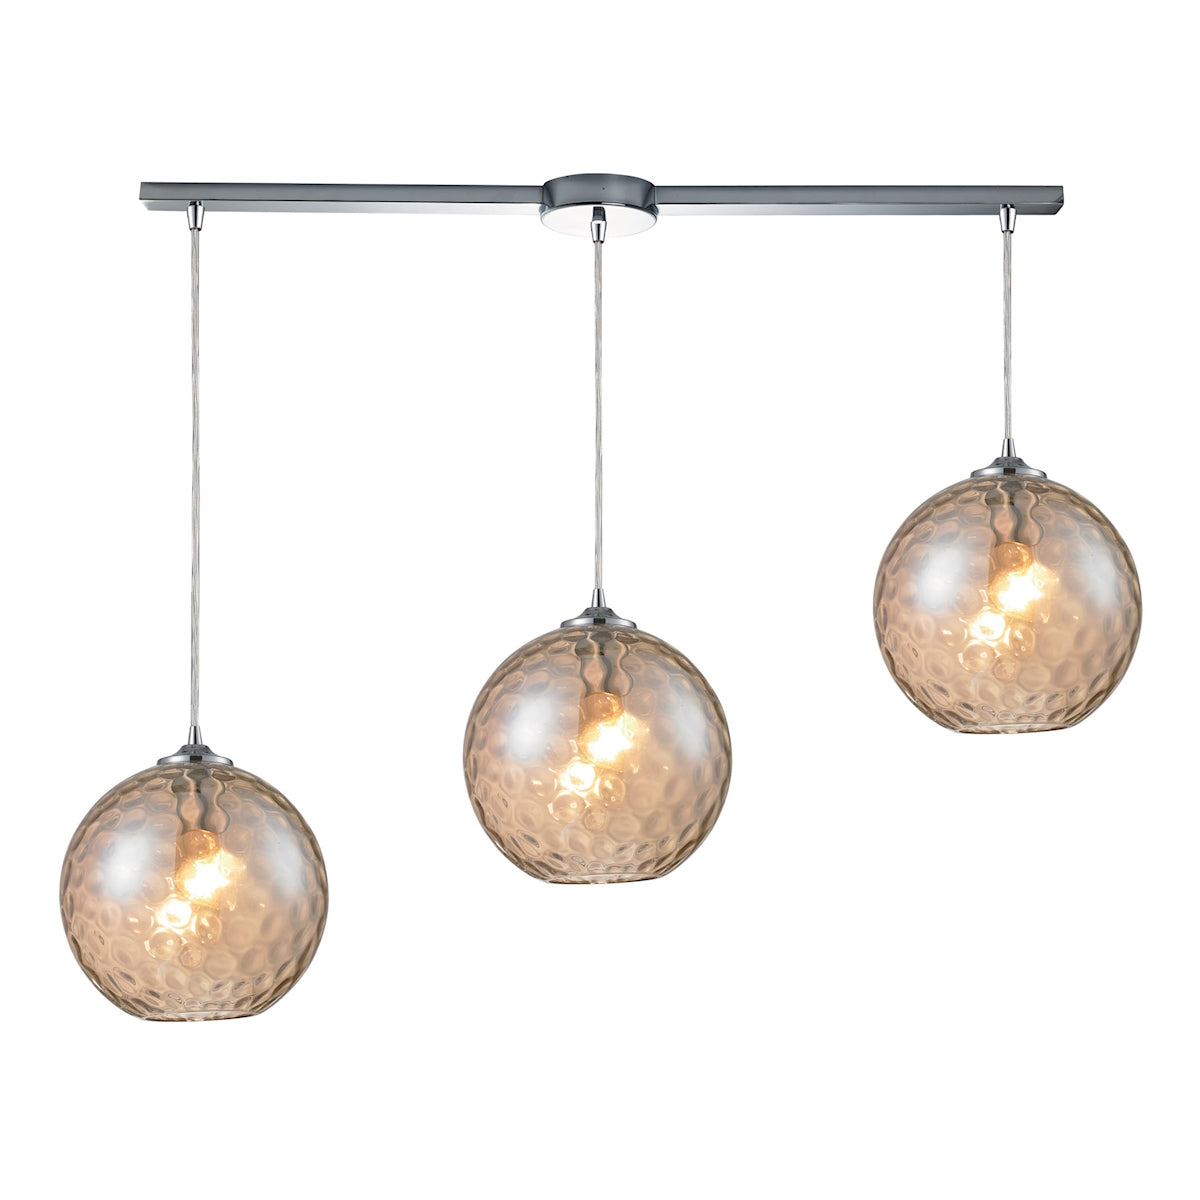 ELK Lighting 31380/3L-CMP - Watersphere 10" Wide 3-Light Linear Pendant Fixture in Chrome with Hamme